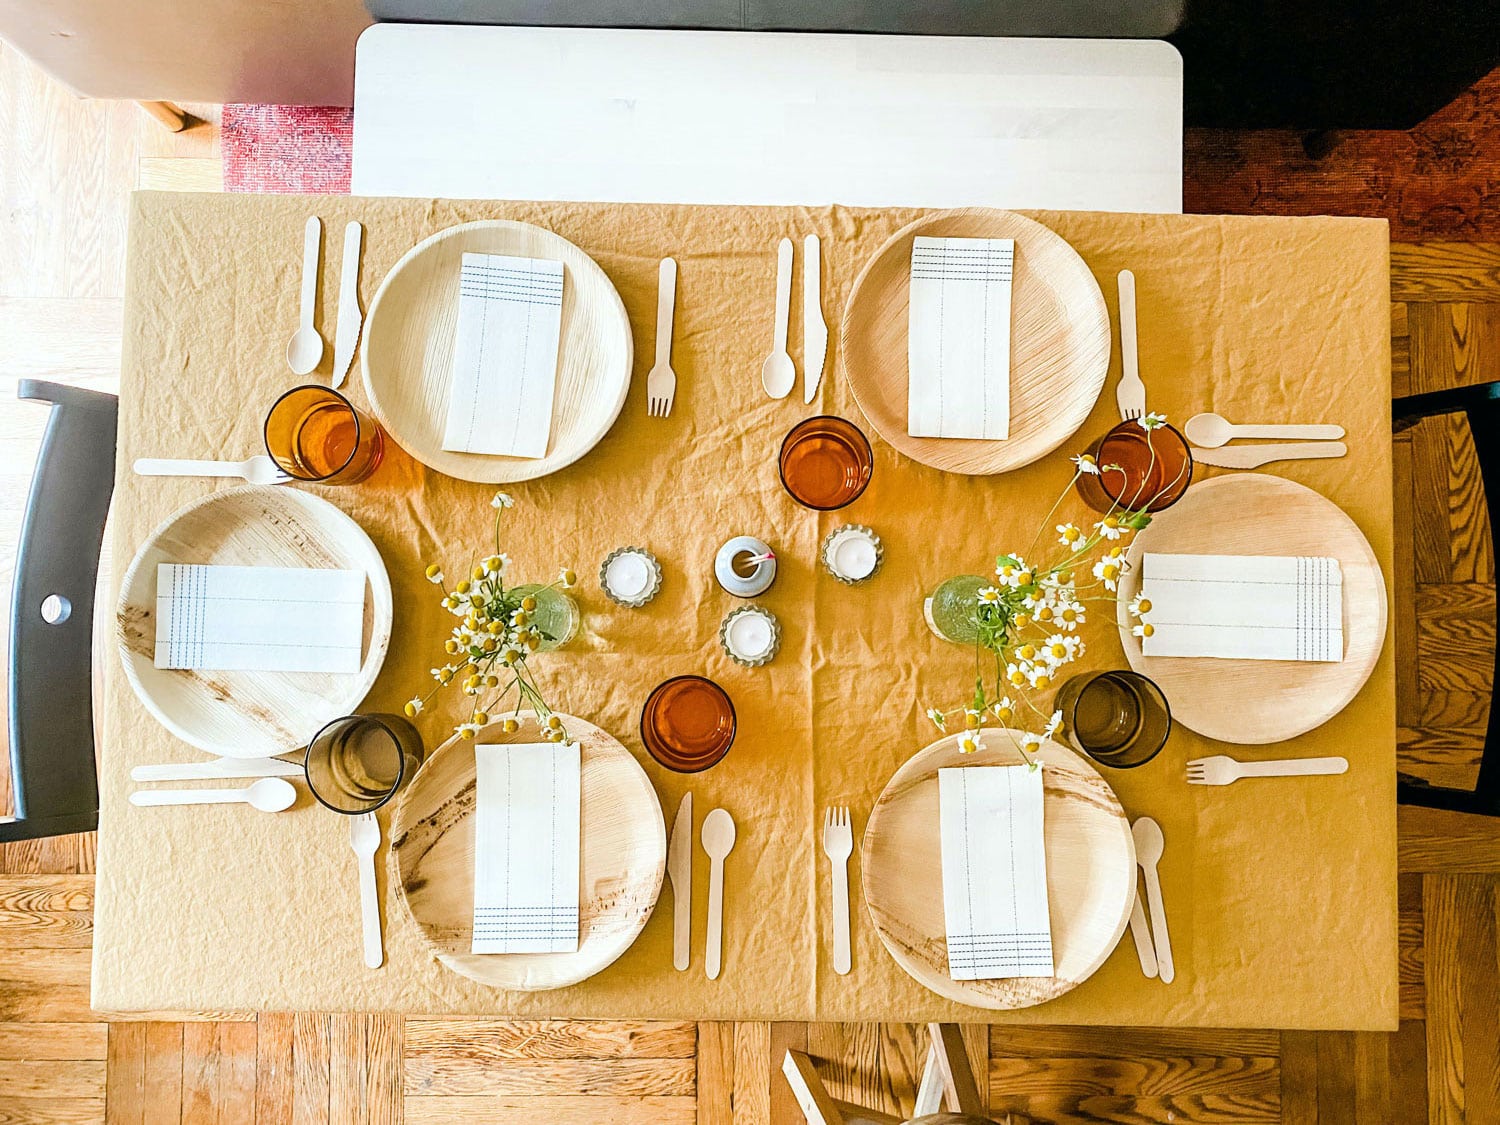 https://mostlovelythings.com/wp-content/uploads/2022/06/pretty-table-with-wood-disposable-paper-products-1.jpg